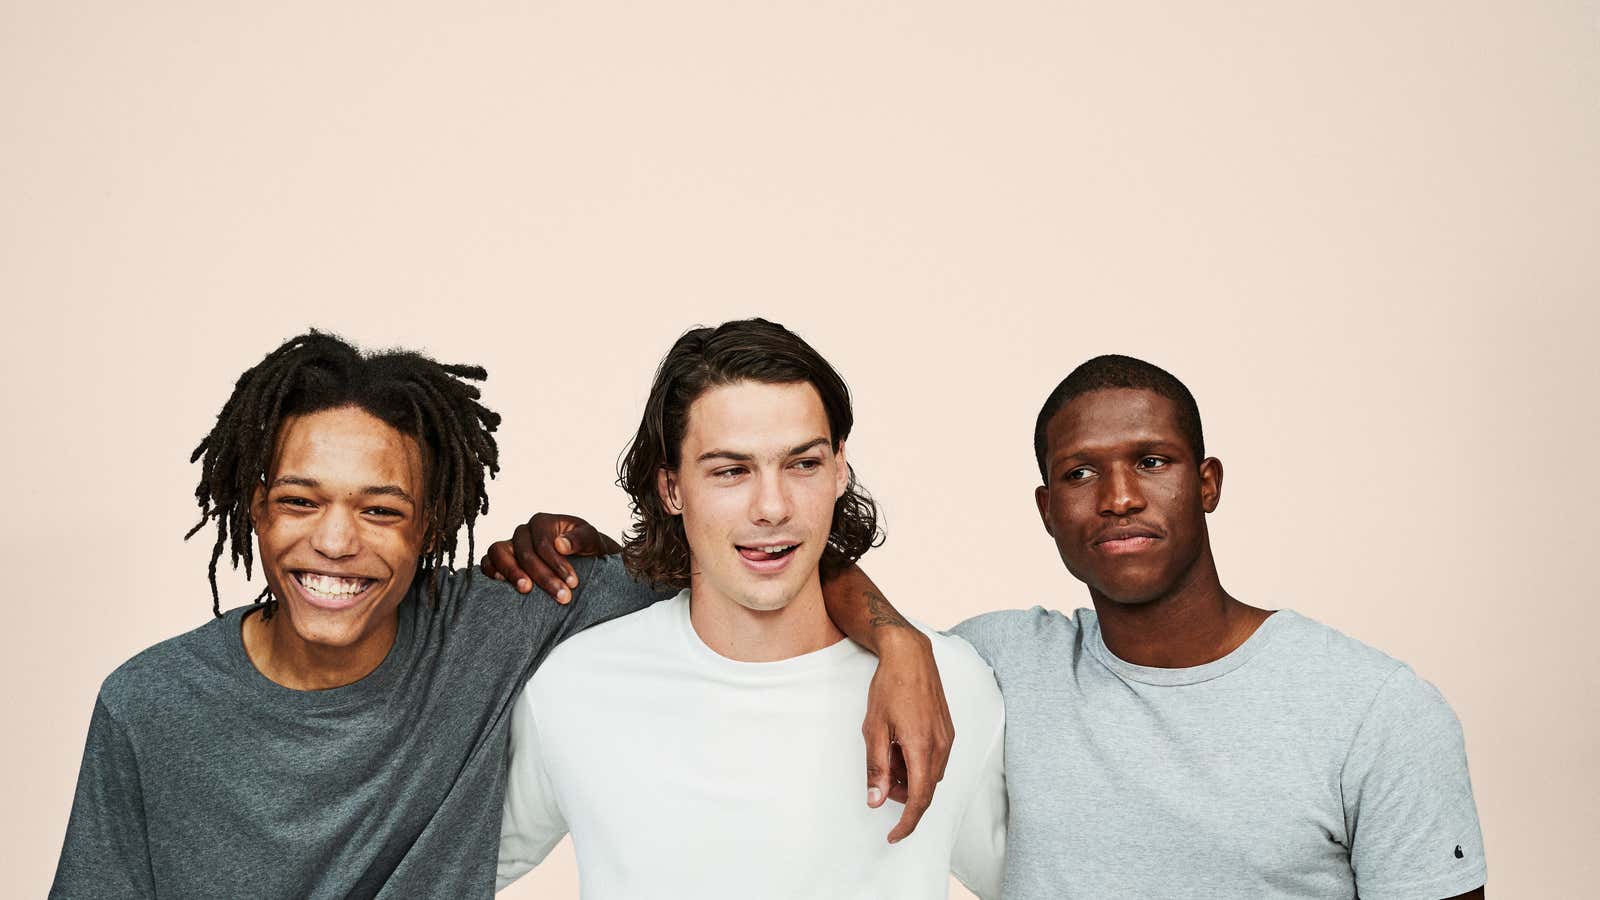 “Hims” is using the Goop aesthetic to sell men’s wellness